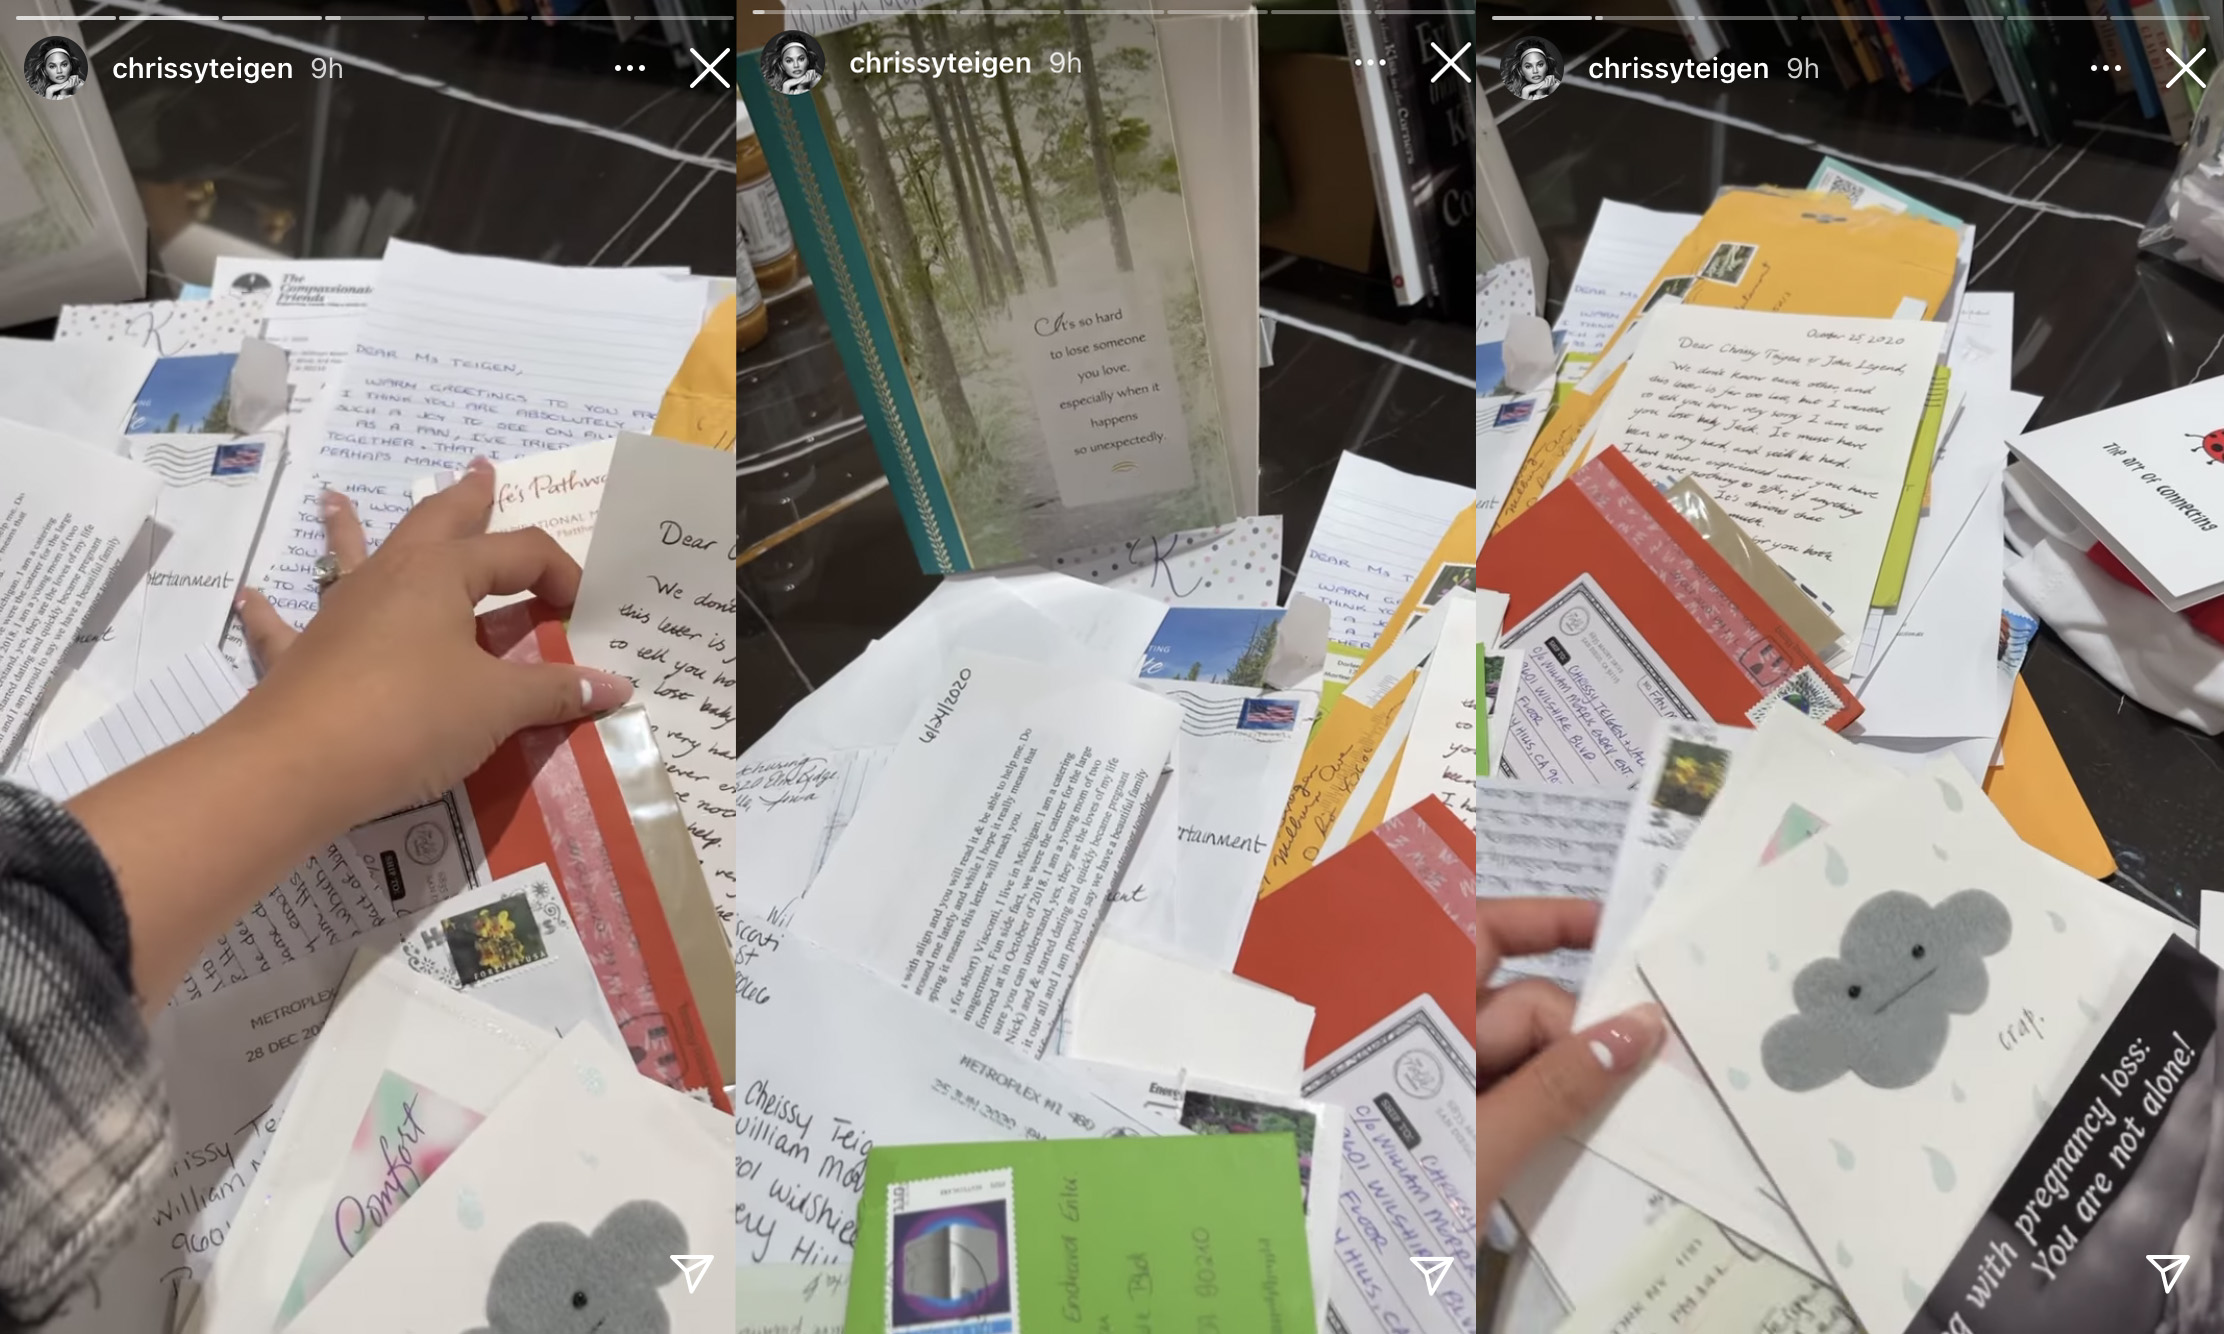 Chrissy Teigen shows the fan mail she's received from supporters after her pregnancy loss last year.